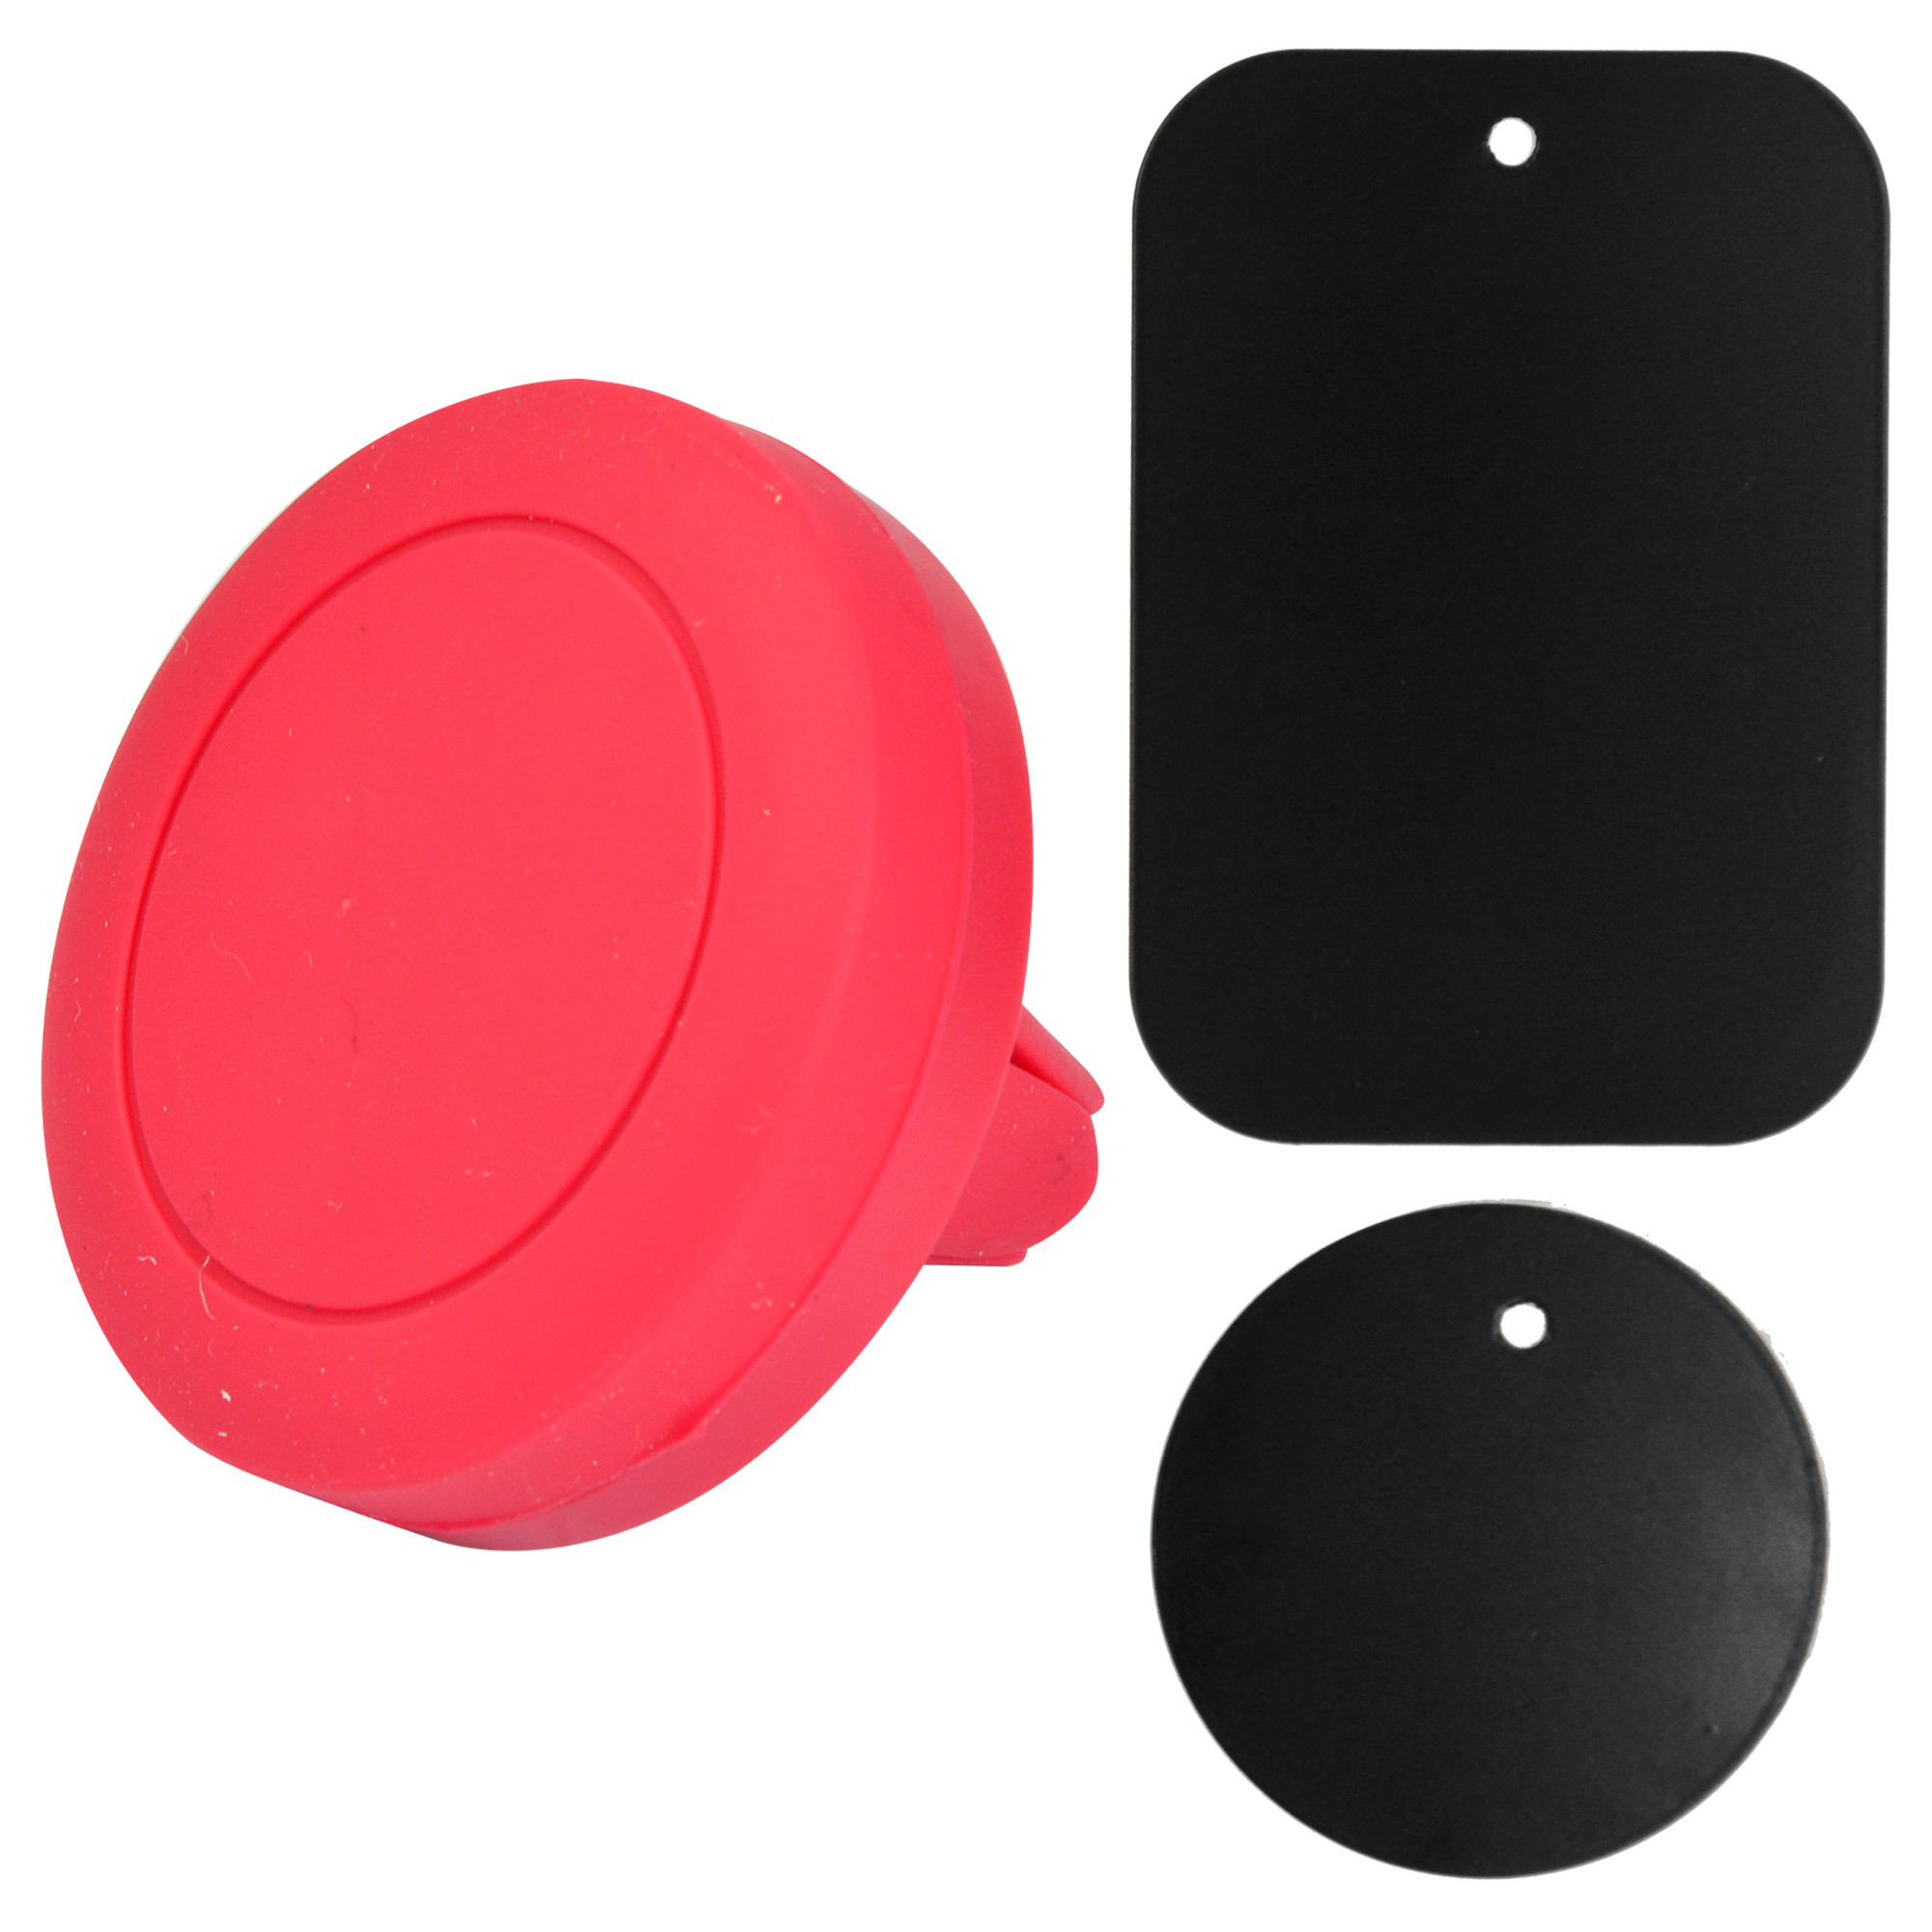 Universal Magnetic Air Vent Car Mount Holder QY (Red)